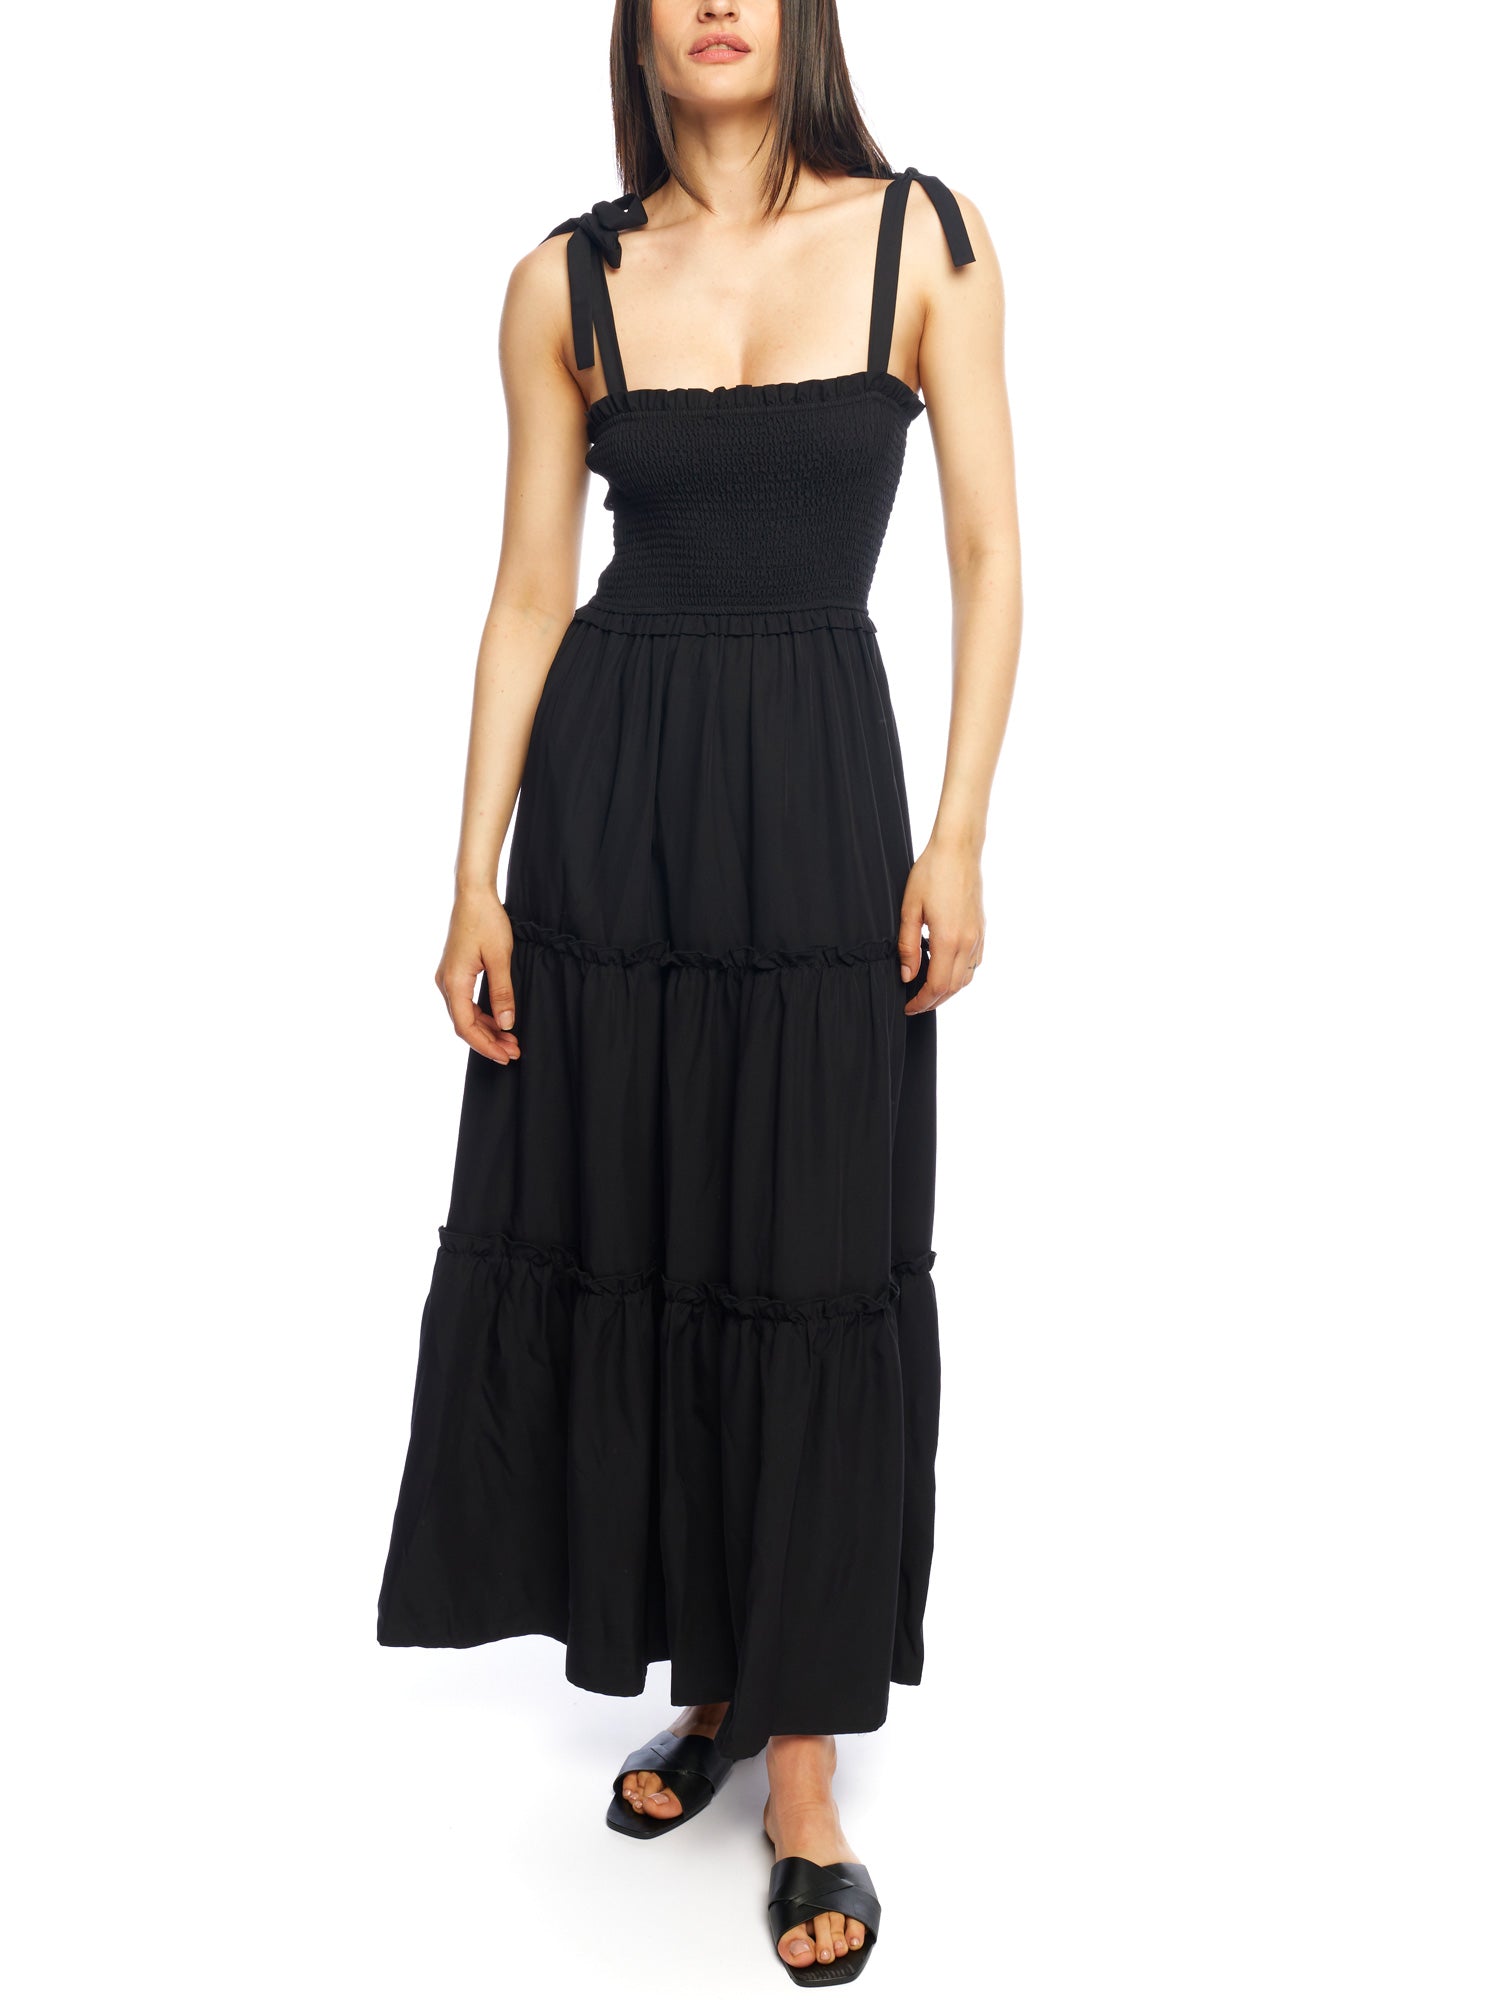 Darla tiered maxi dress with smocked bodice and tie sleeves in black